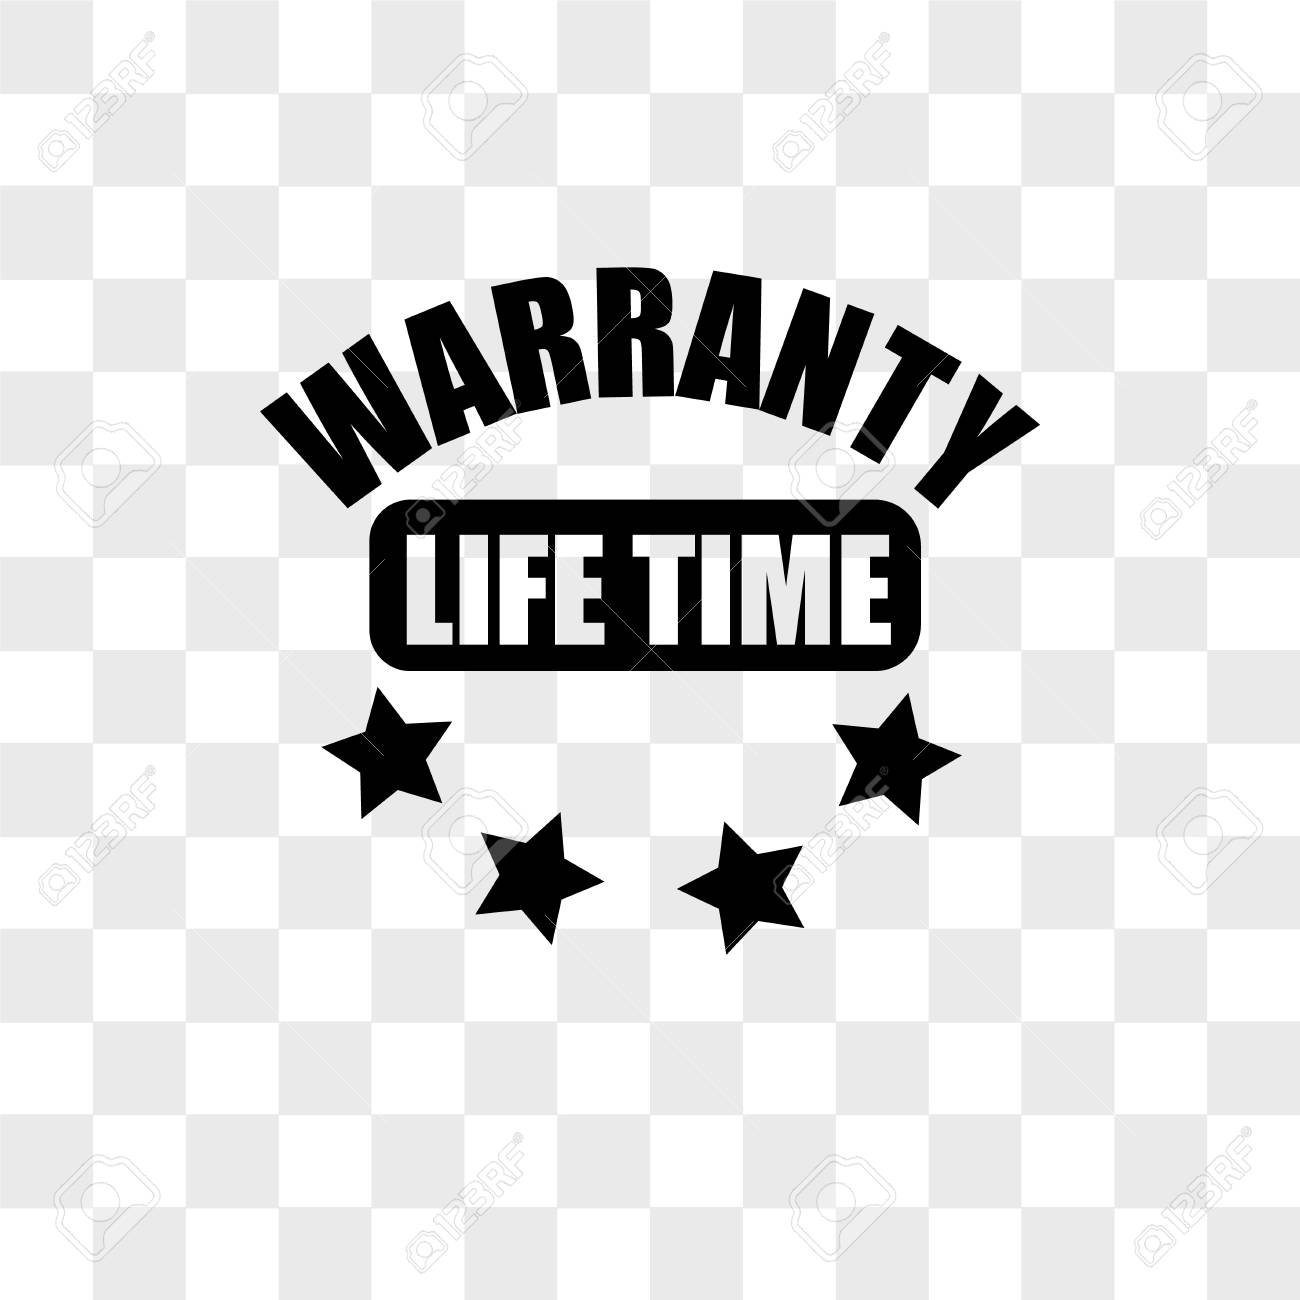 Lifetime Warranty Vector Icon Isolated On Transparent Background